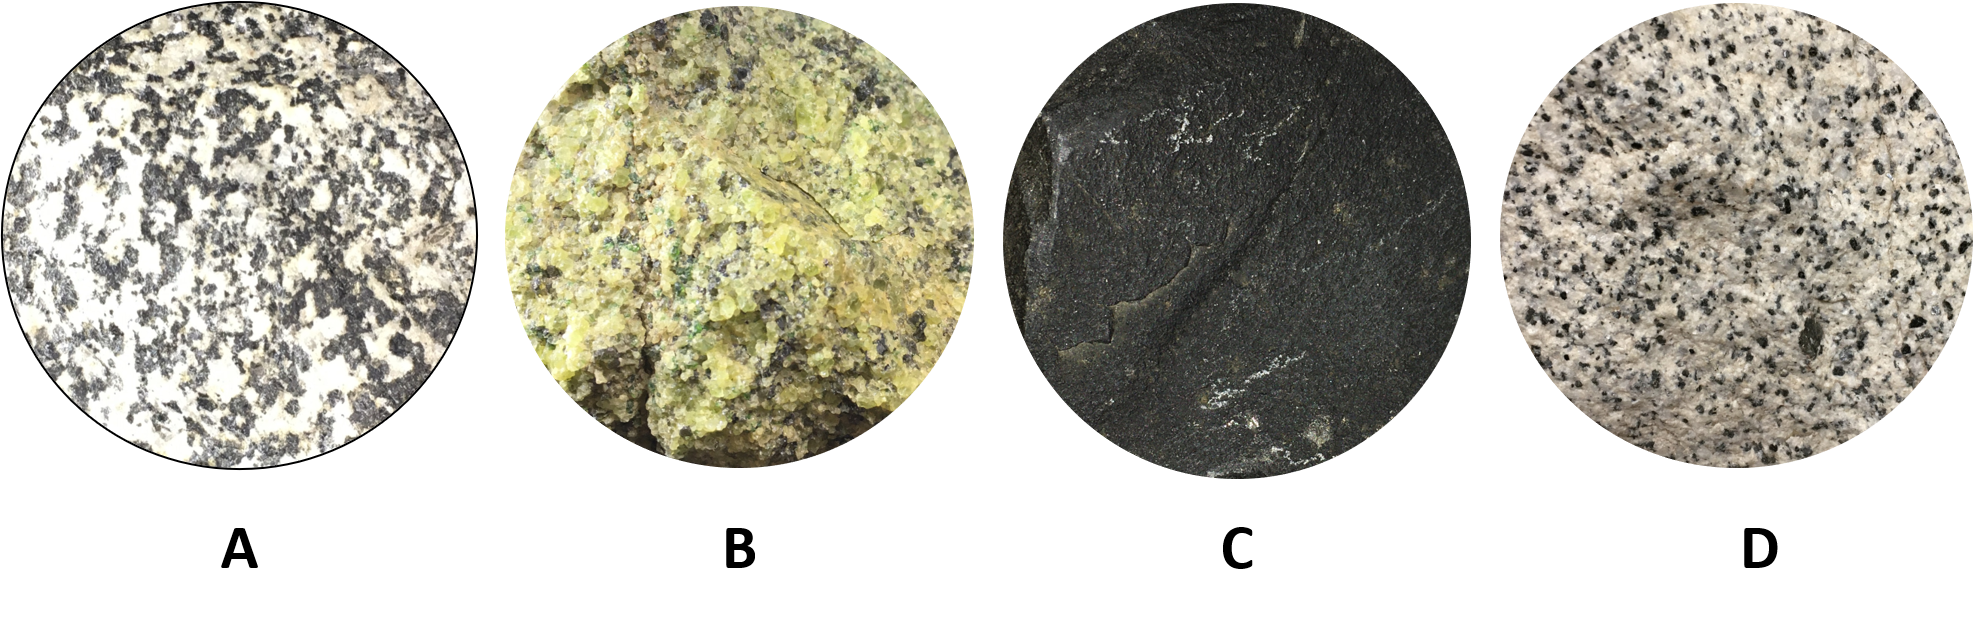 Sample A is a black and white coarse grained igneous rock; Sample B is a green, coarse grained igneous rock; Sample C is a black fine-grained igneous rock; Sample D is a lighter colored, coarse grained igneous rock. 